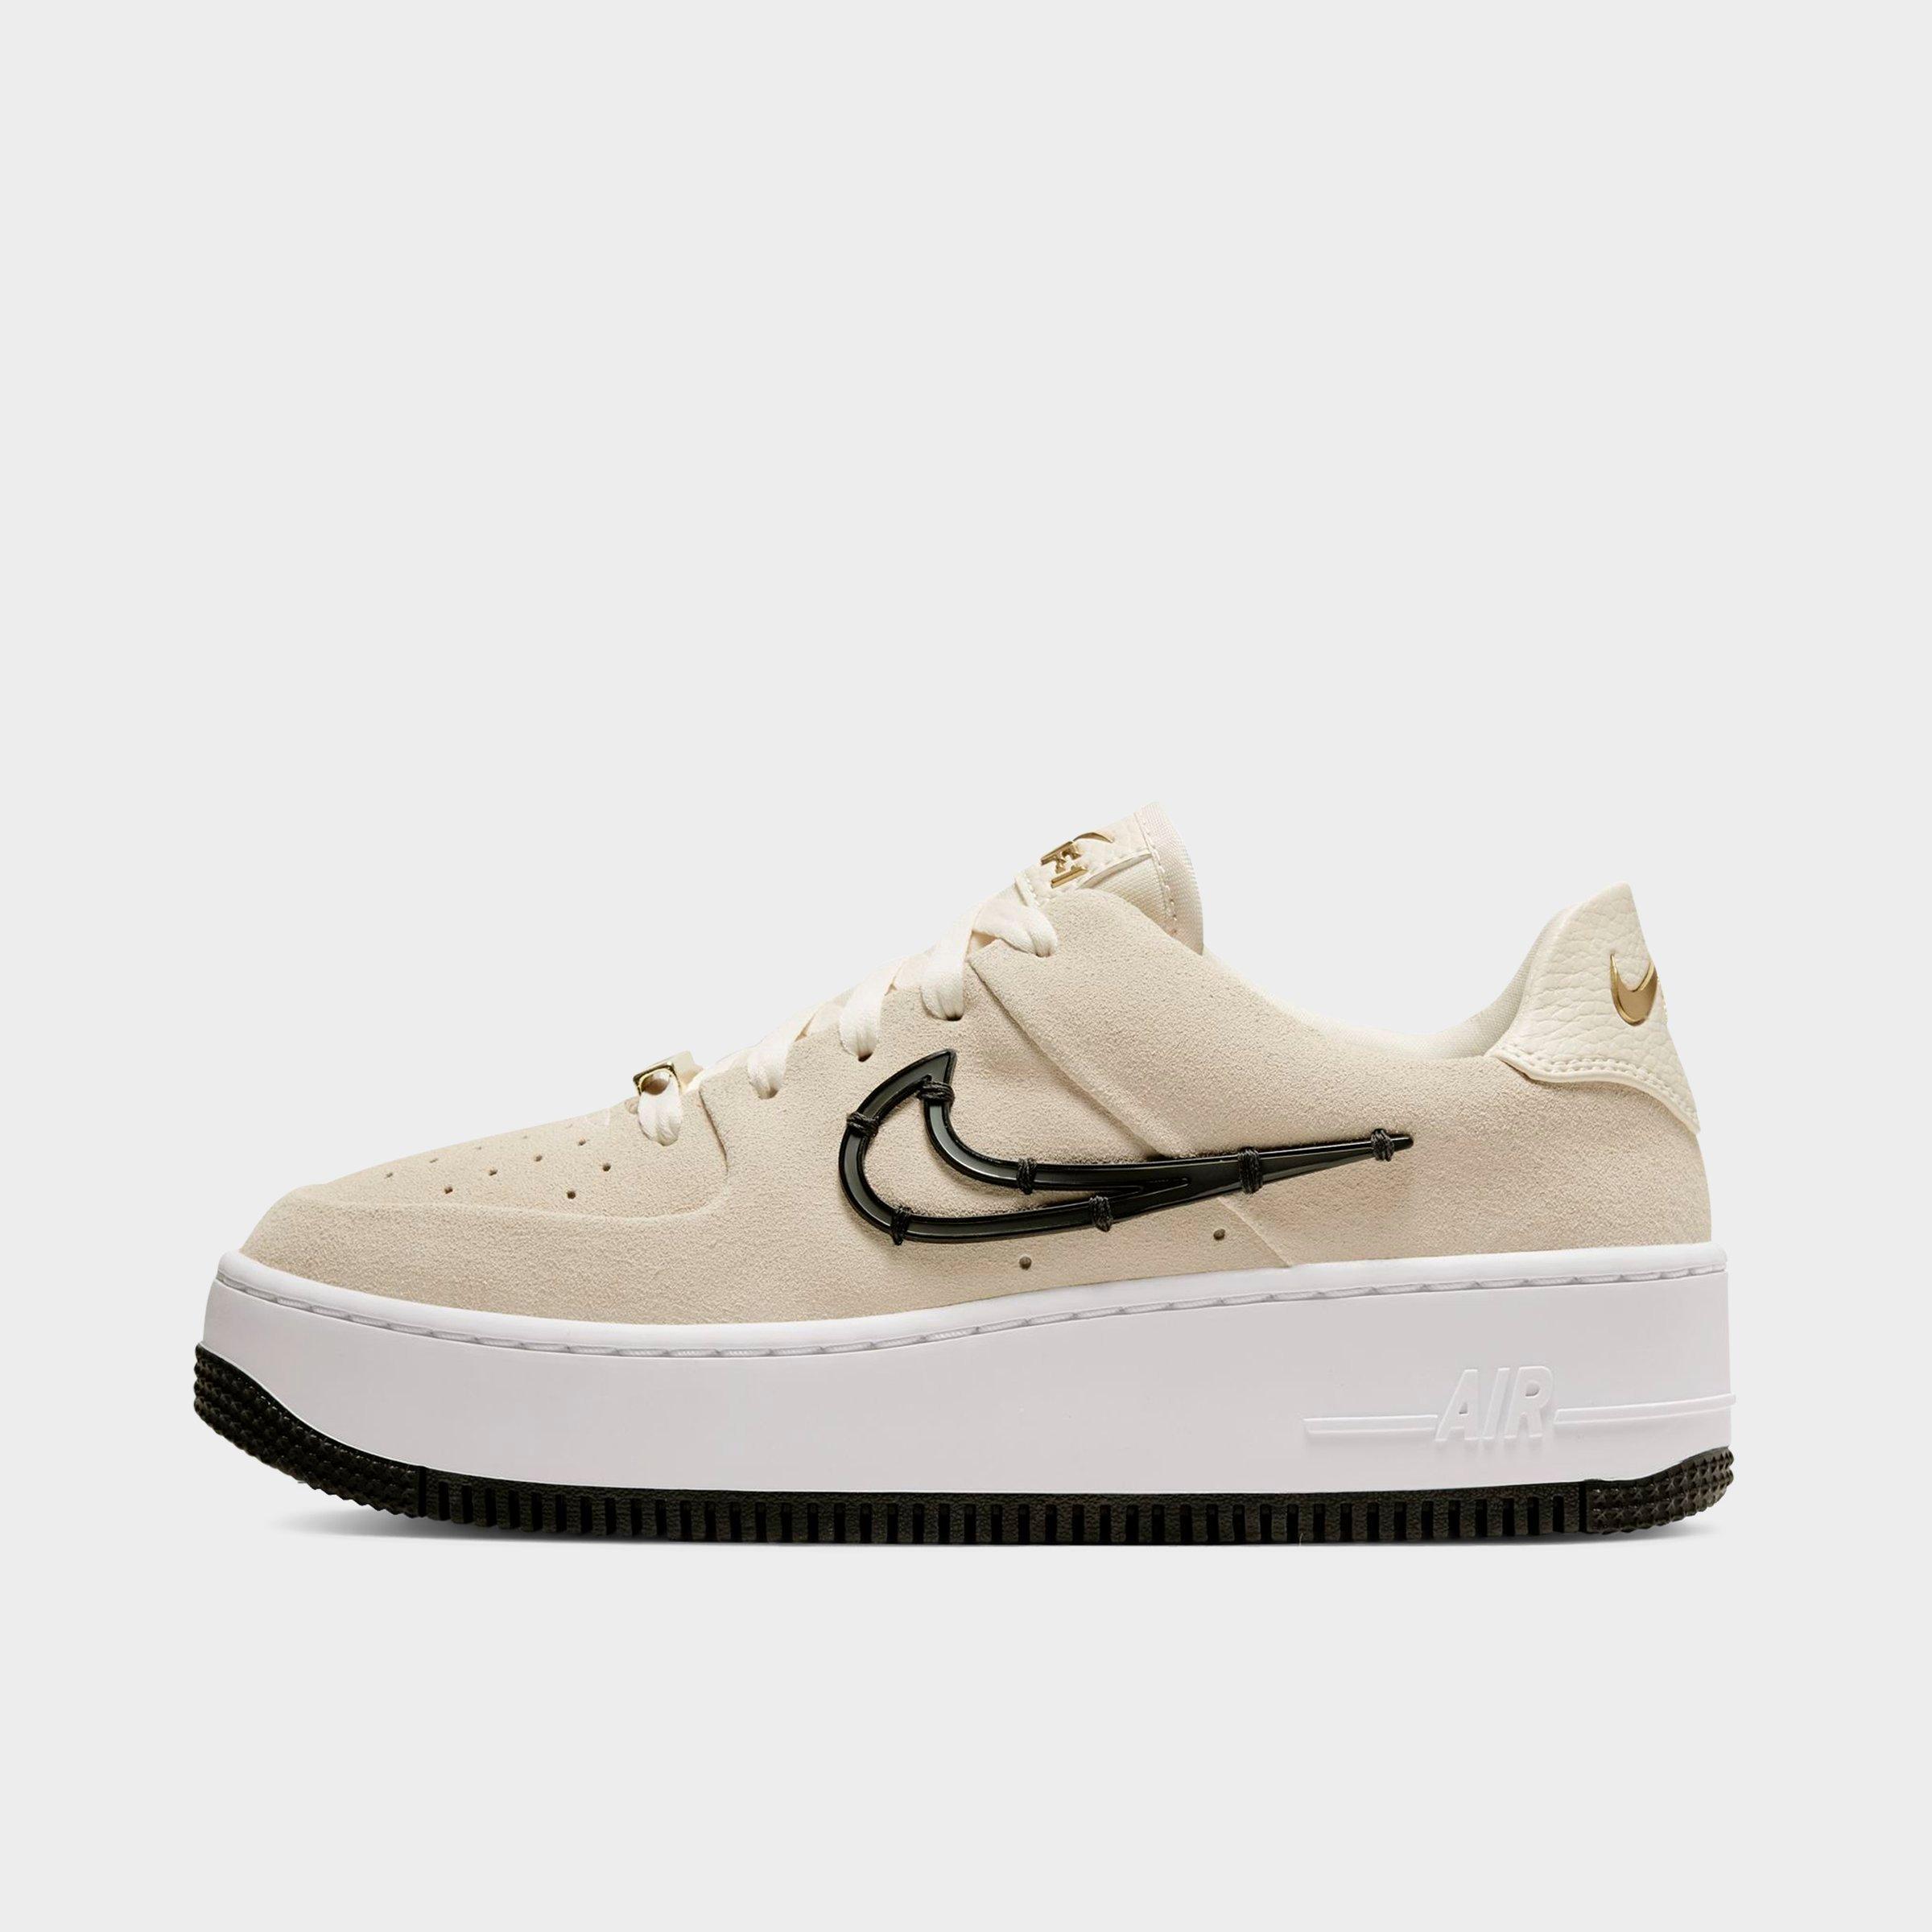 nike ivory gum sole air force 1 sage low trainers